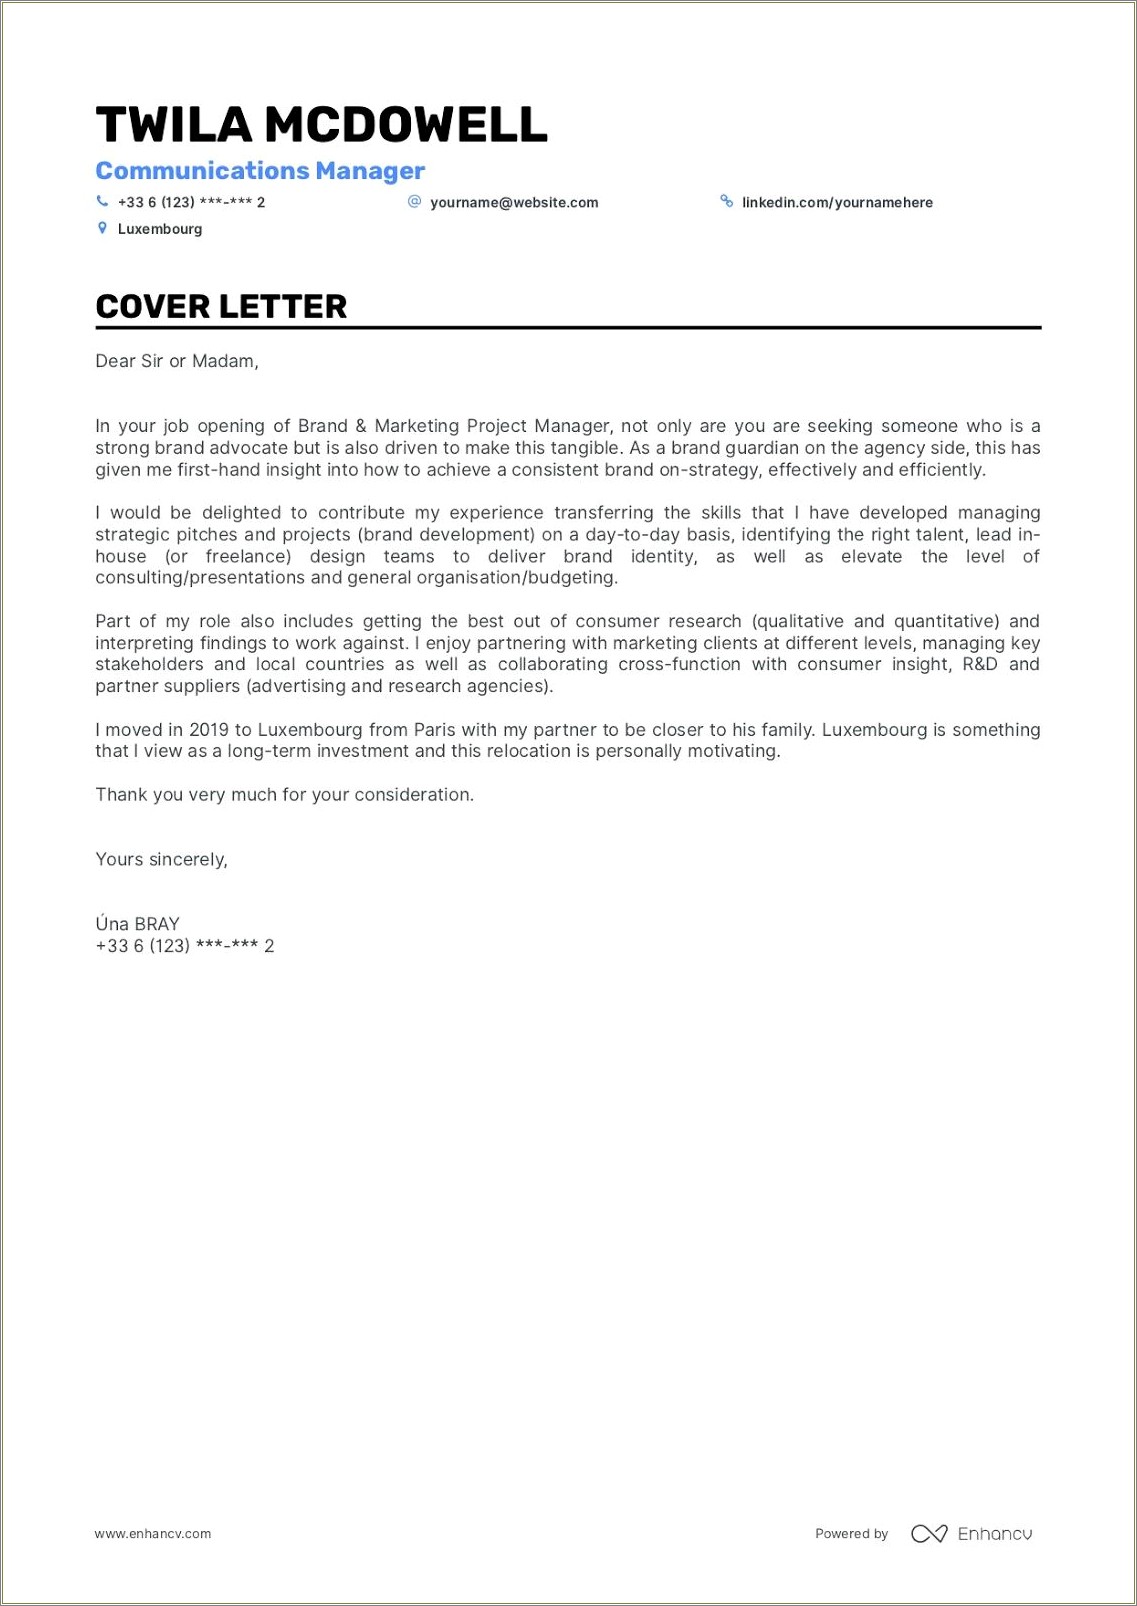 Project Not On Resume But In Cover Letter